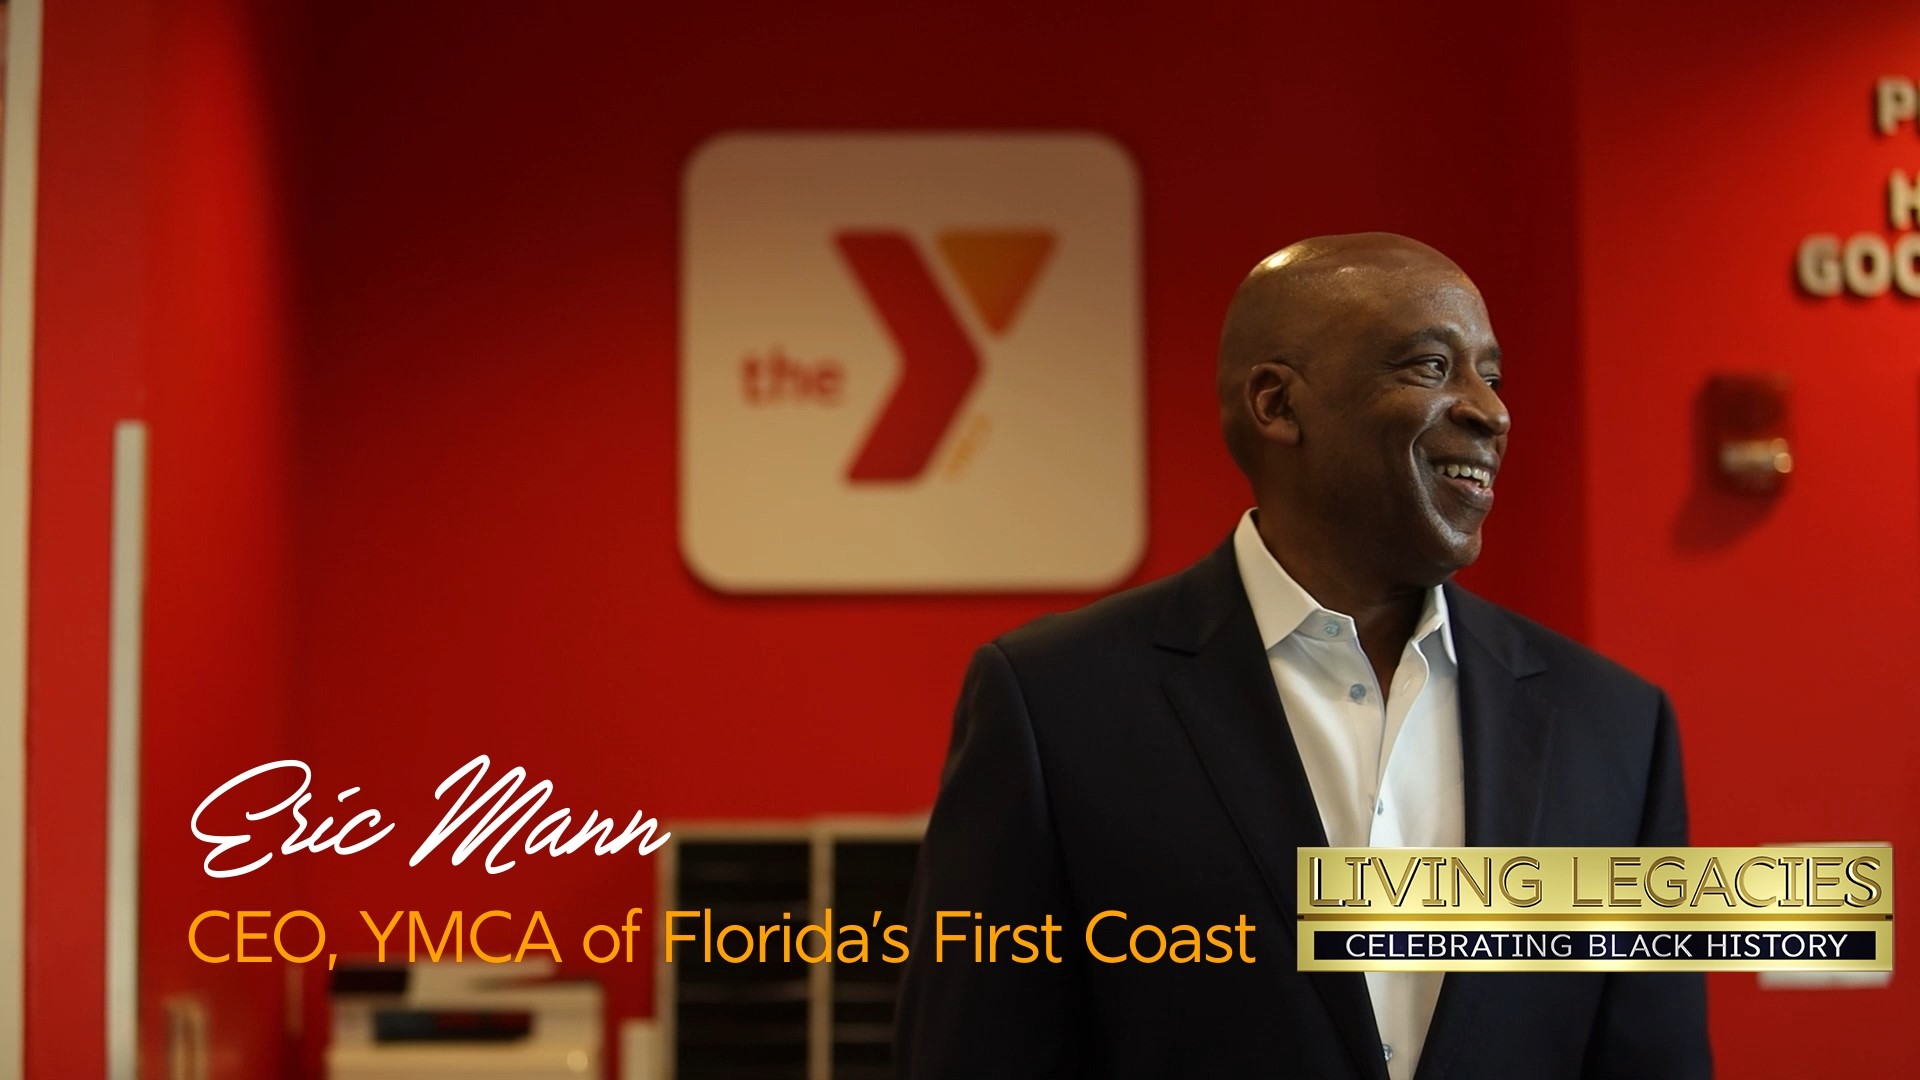 Eric Mann, President and CEO of the First Coast YMCA, is not just a visionary leader; he's a living legacy.